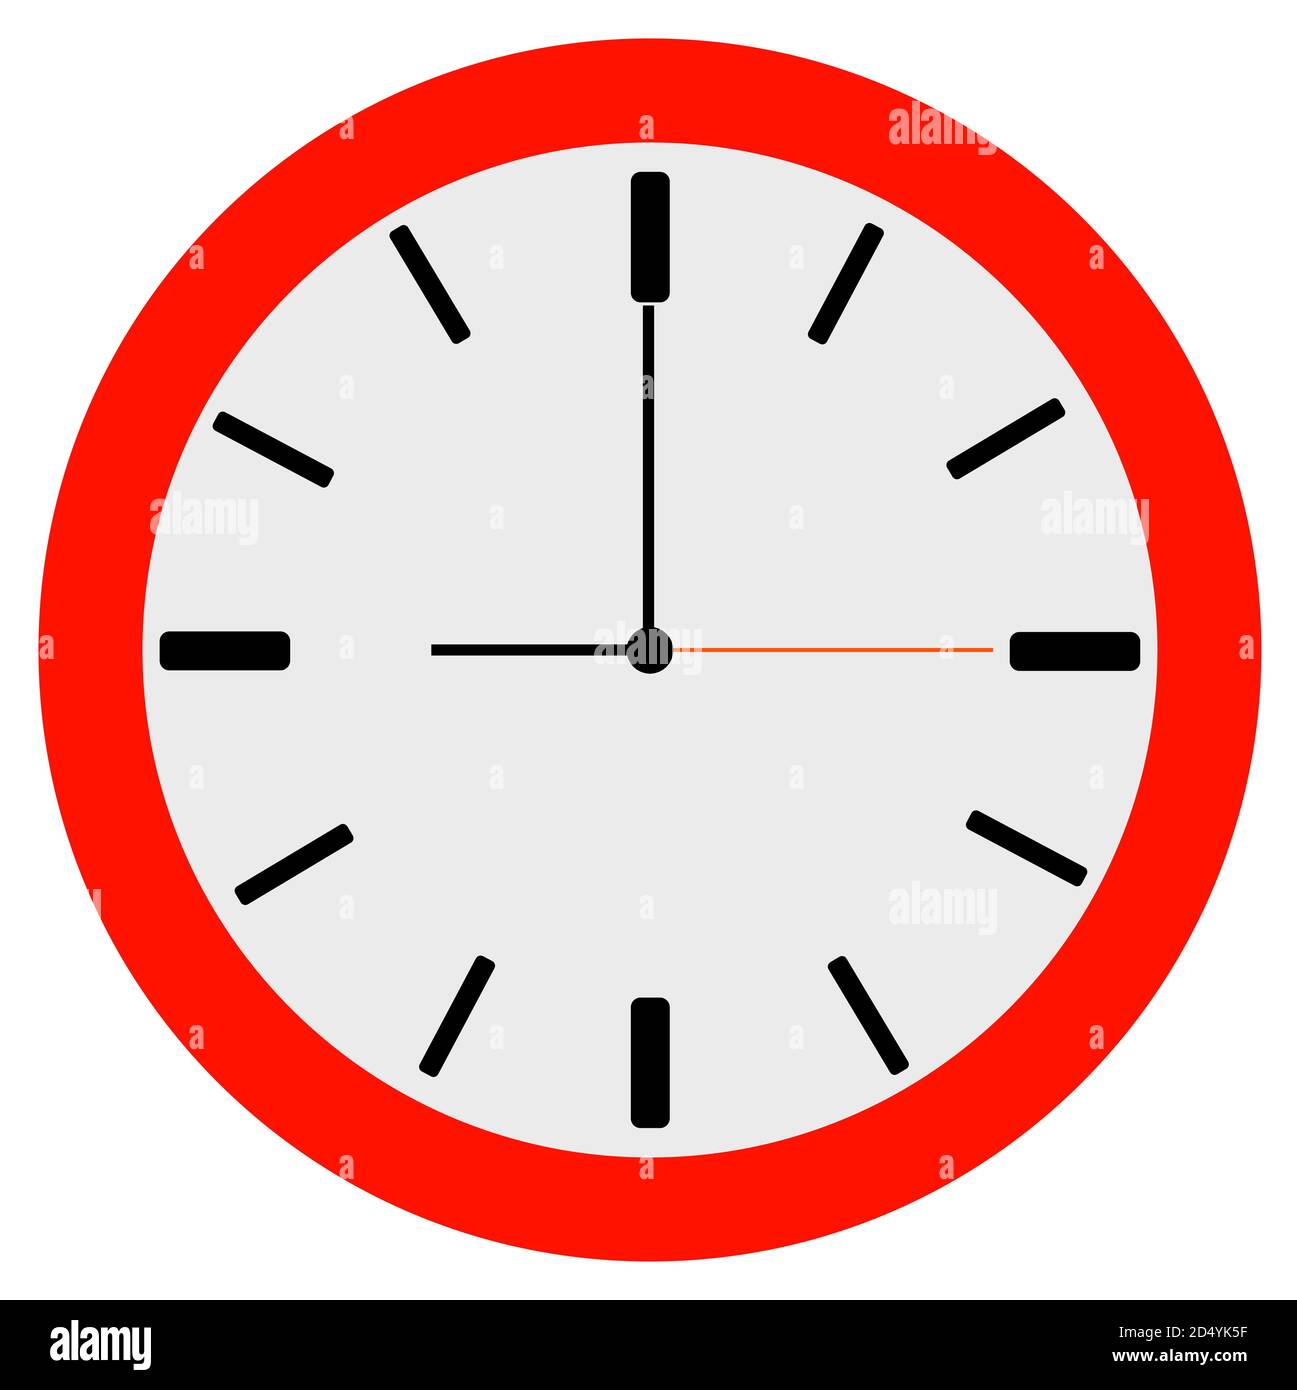 Dial of a wall clock with hands showing the time. Stock Vector